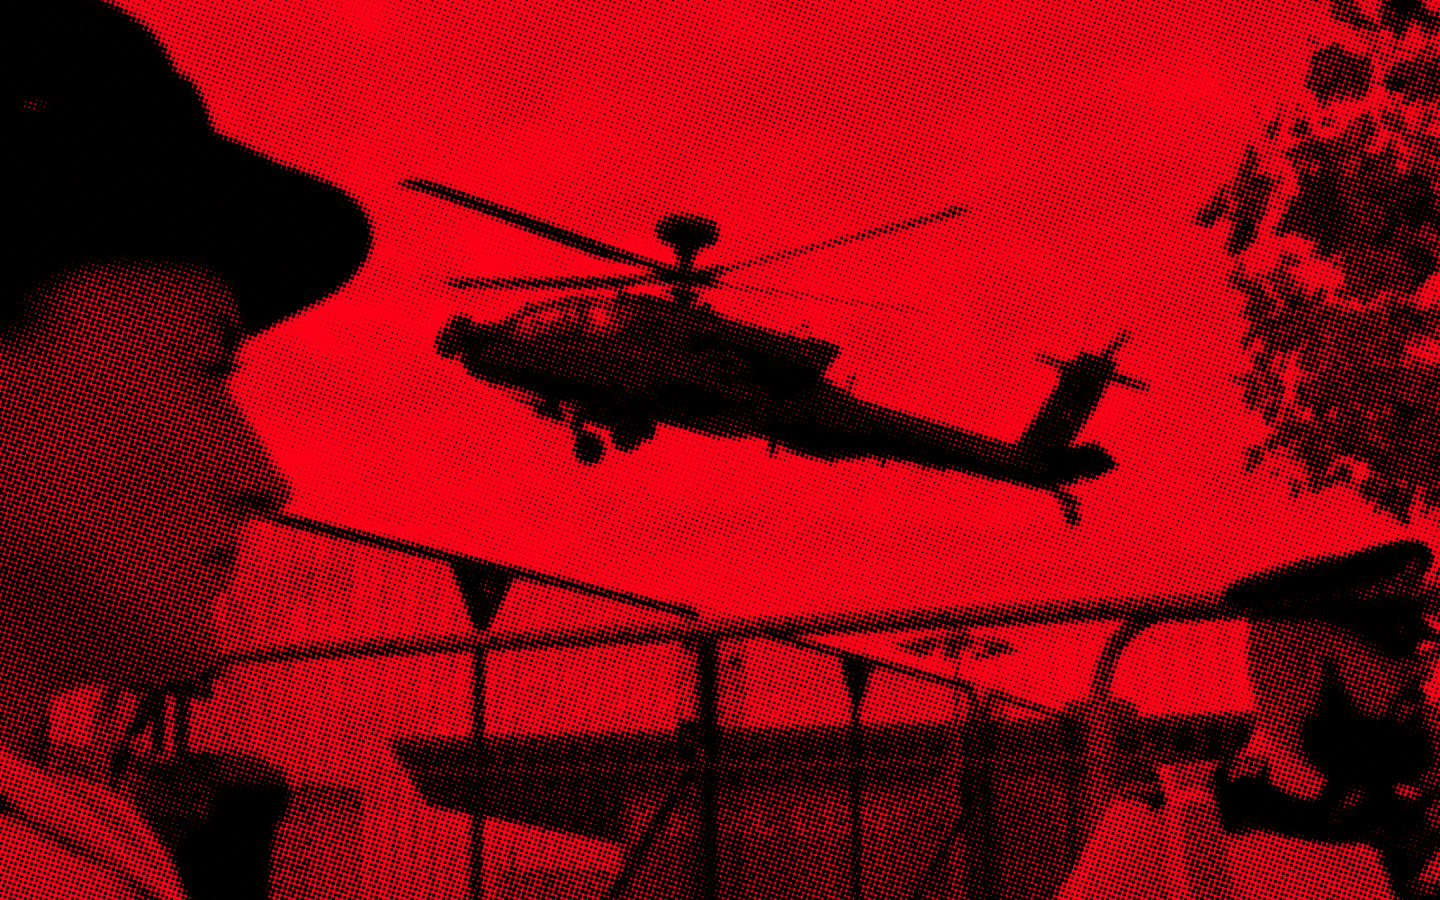 Red and black image of a military helicopter taking off with police in foreground